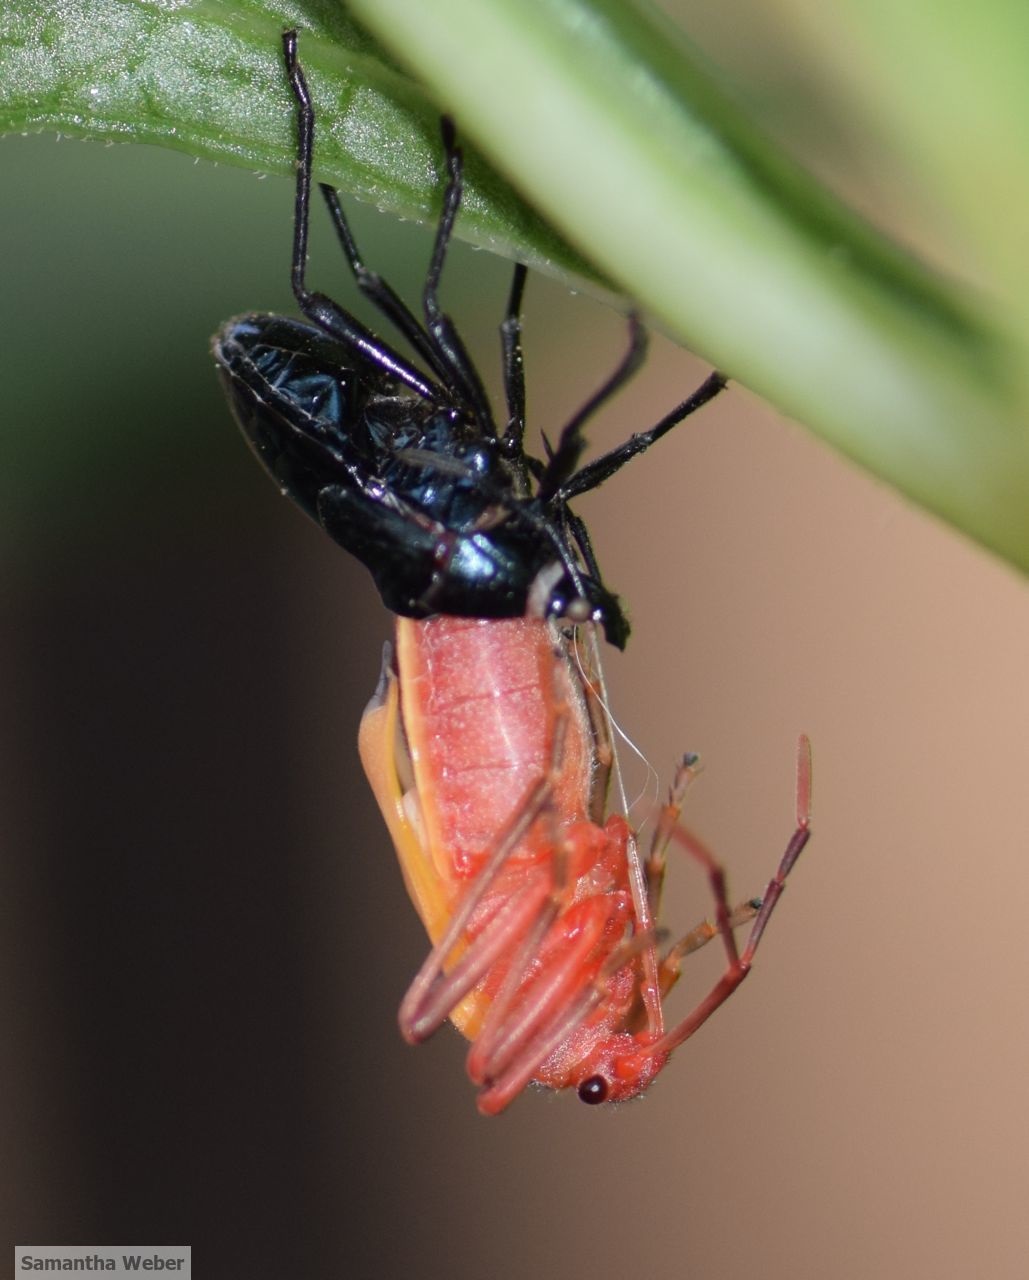 Bordered plant bug shedding its old exoskeleton so it can grow. Photograph by Samantha Weber 2015.